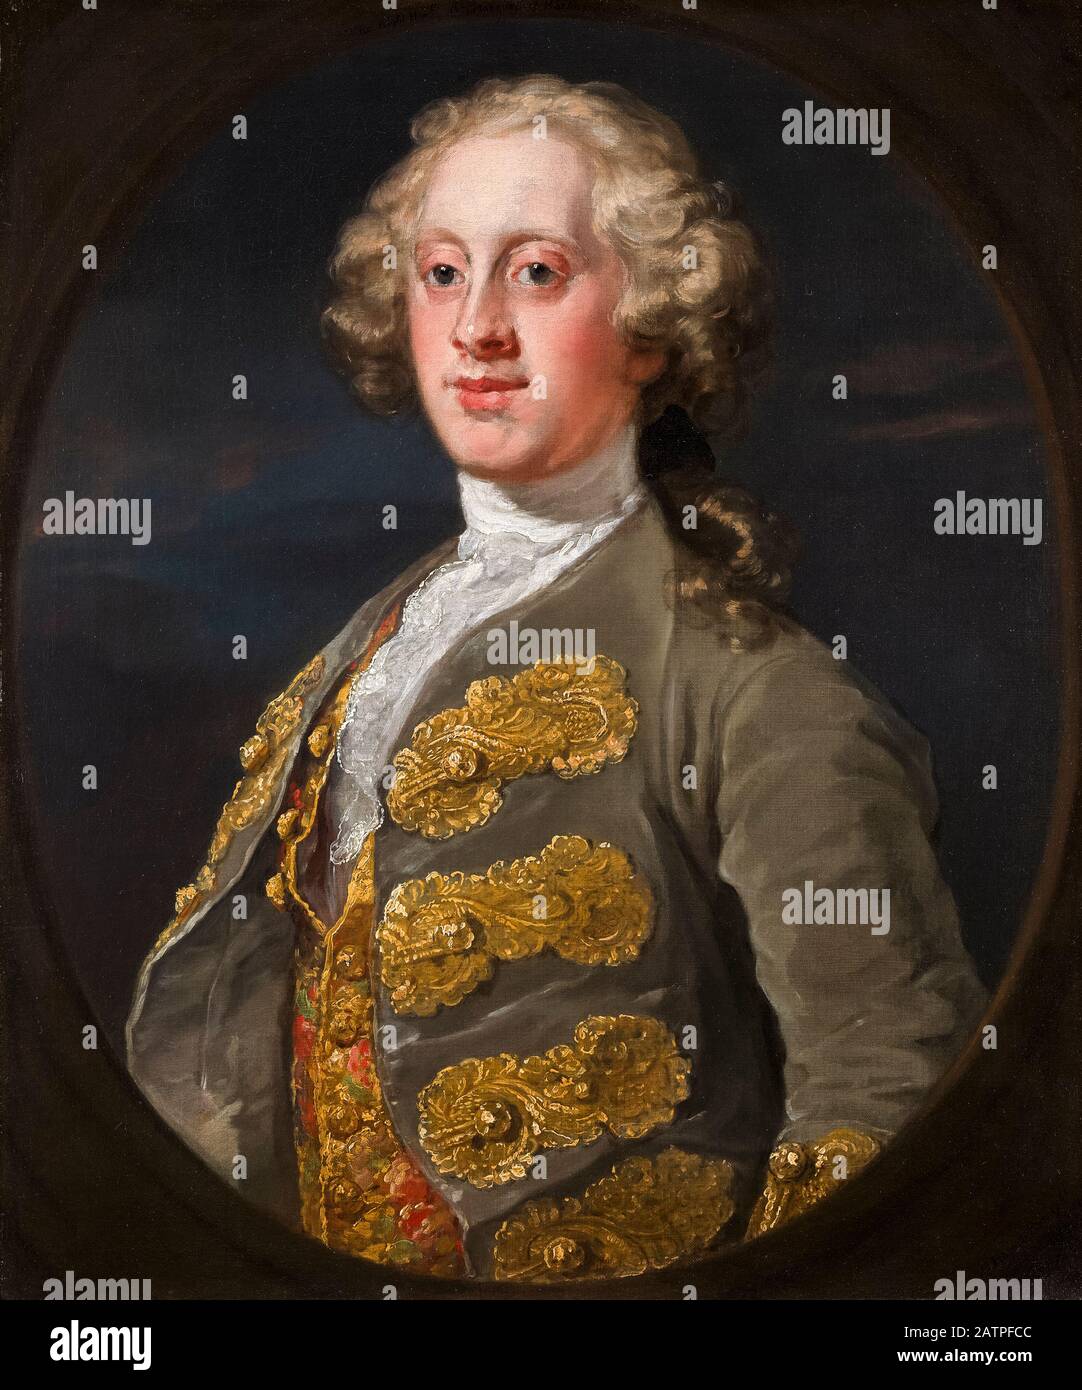 William Cavendish, Marquess of Hartington (1720-1764), Later 4th Duke of Devonshire and Prime Minister of Great Britain 1756-1757, portrait painting by William Hogarth, 1741 Stock Photo